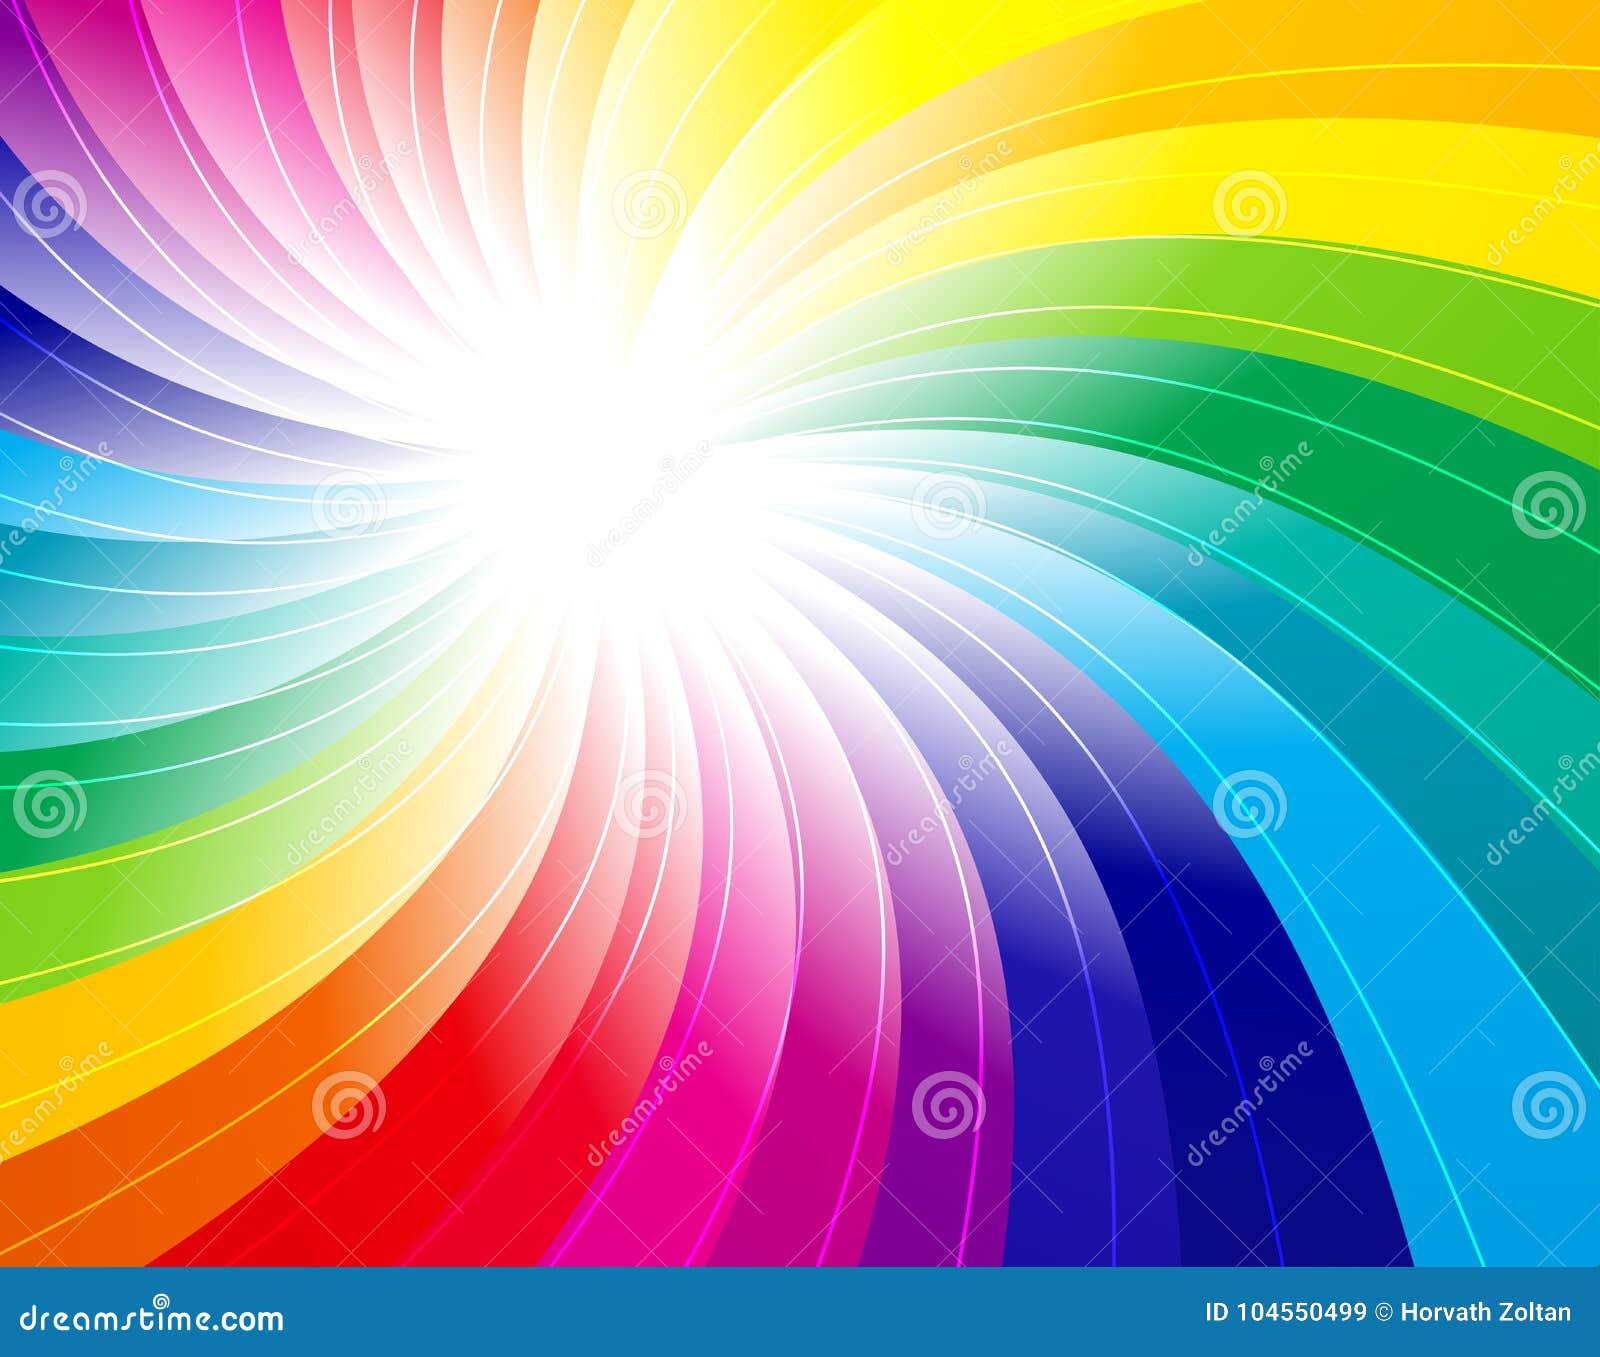 Abstract Rainbow Background Stock Vector - Illustration of disco, background:  104550499